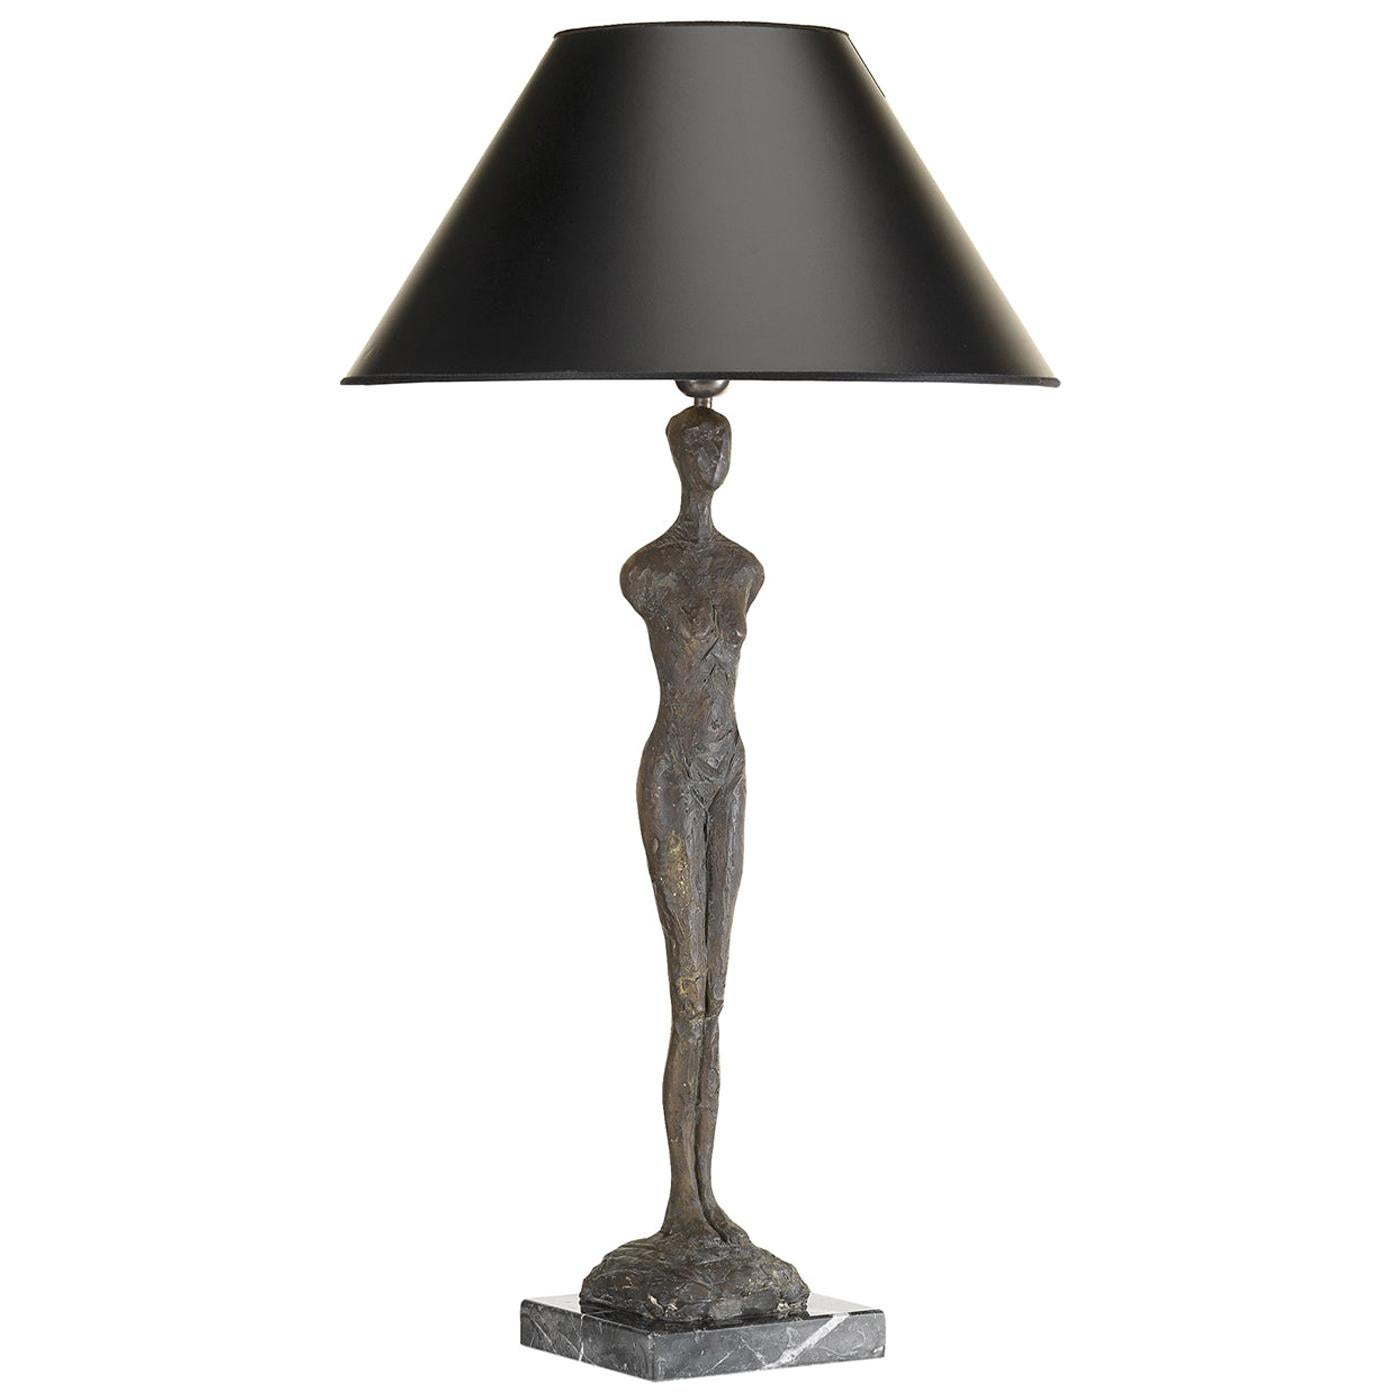 Her Table Lamp For Sale